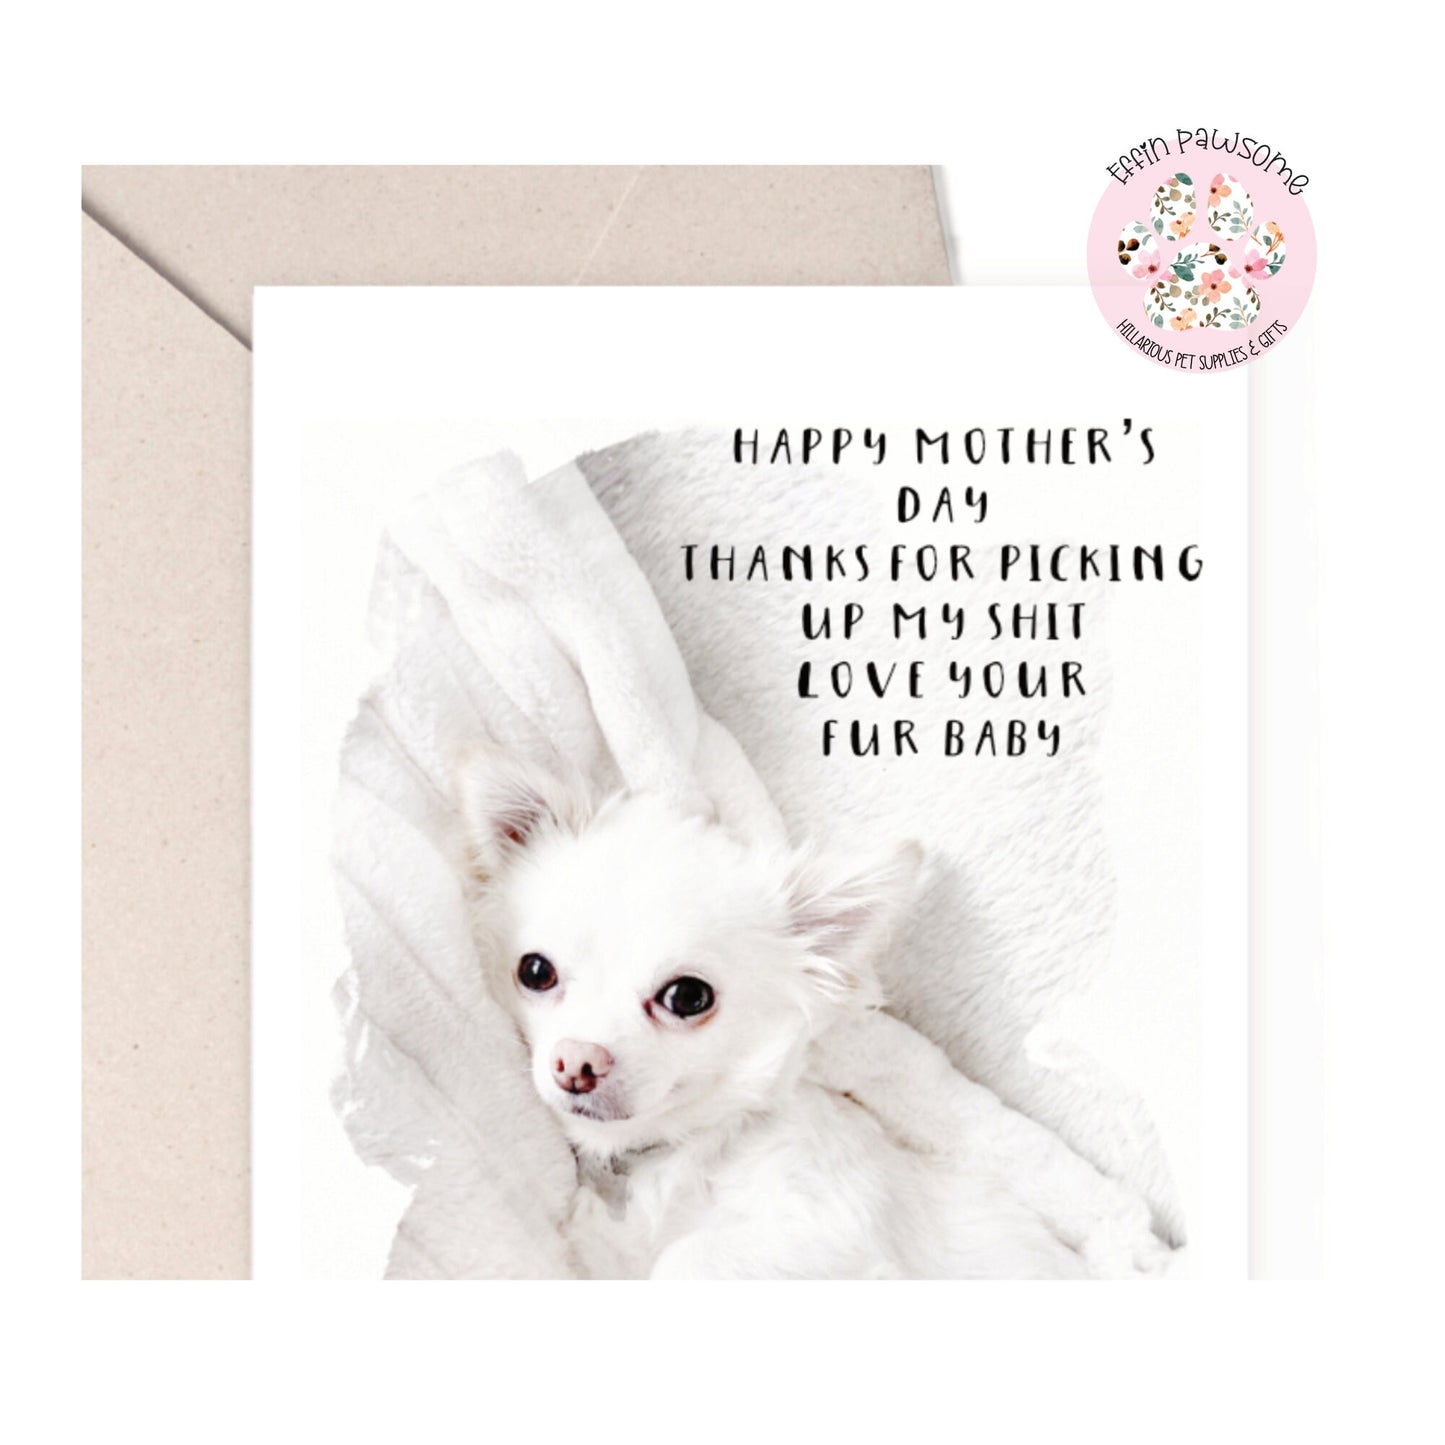 Greetings card - Personalised, Thanks for picking up my shit, love from your fur baby, dog mum, mothers day card, gift from pets